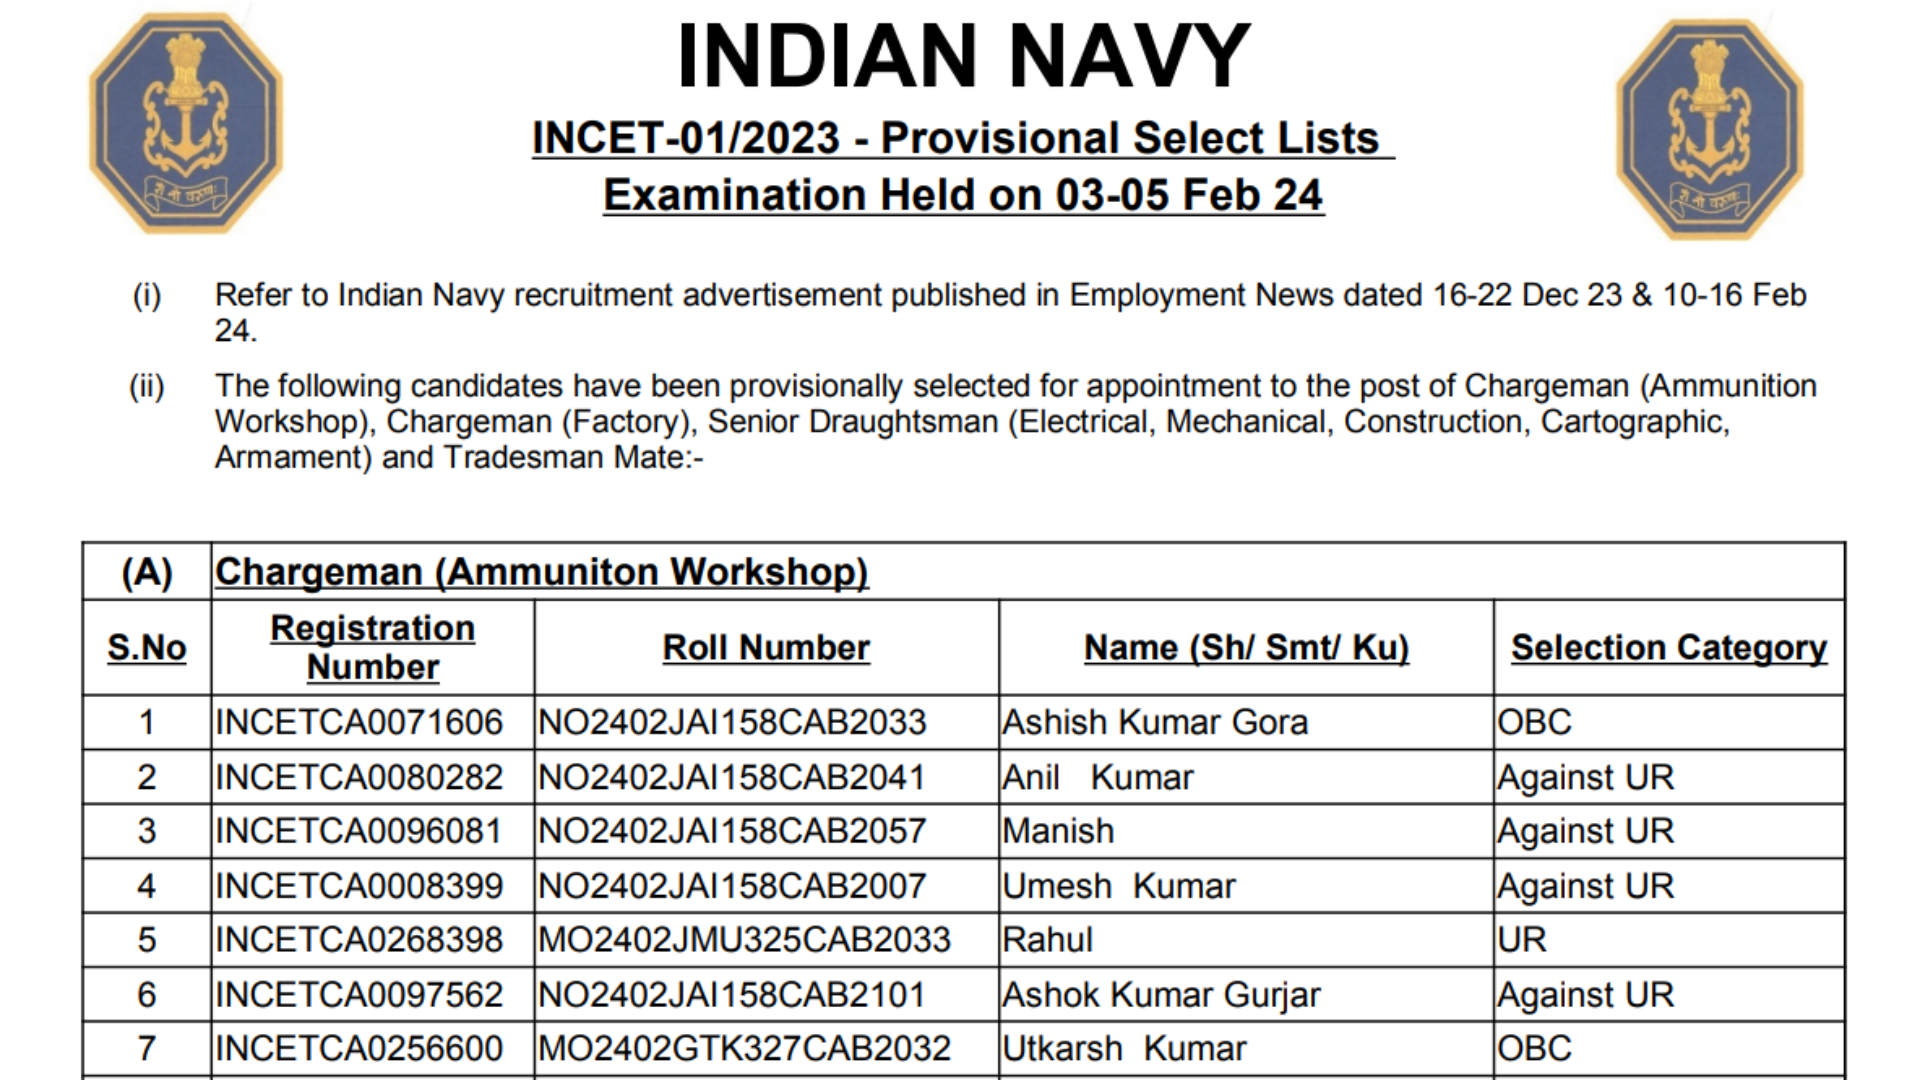 Indian Navy Civilian Entrance Test INCET-01/2023 Recruitment Of Chargeman, Tradesman Mate and Senior Draughtsman Exam 2023 Result for 910 Post